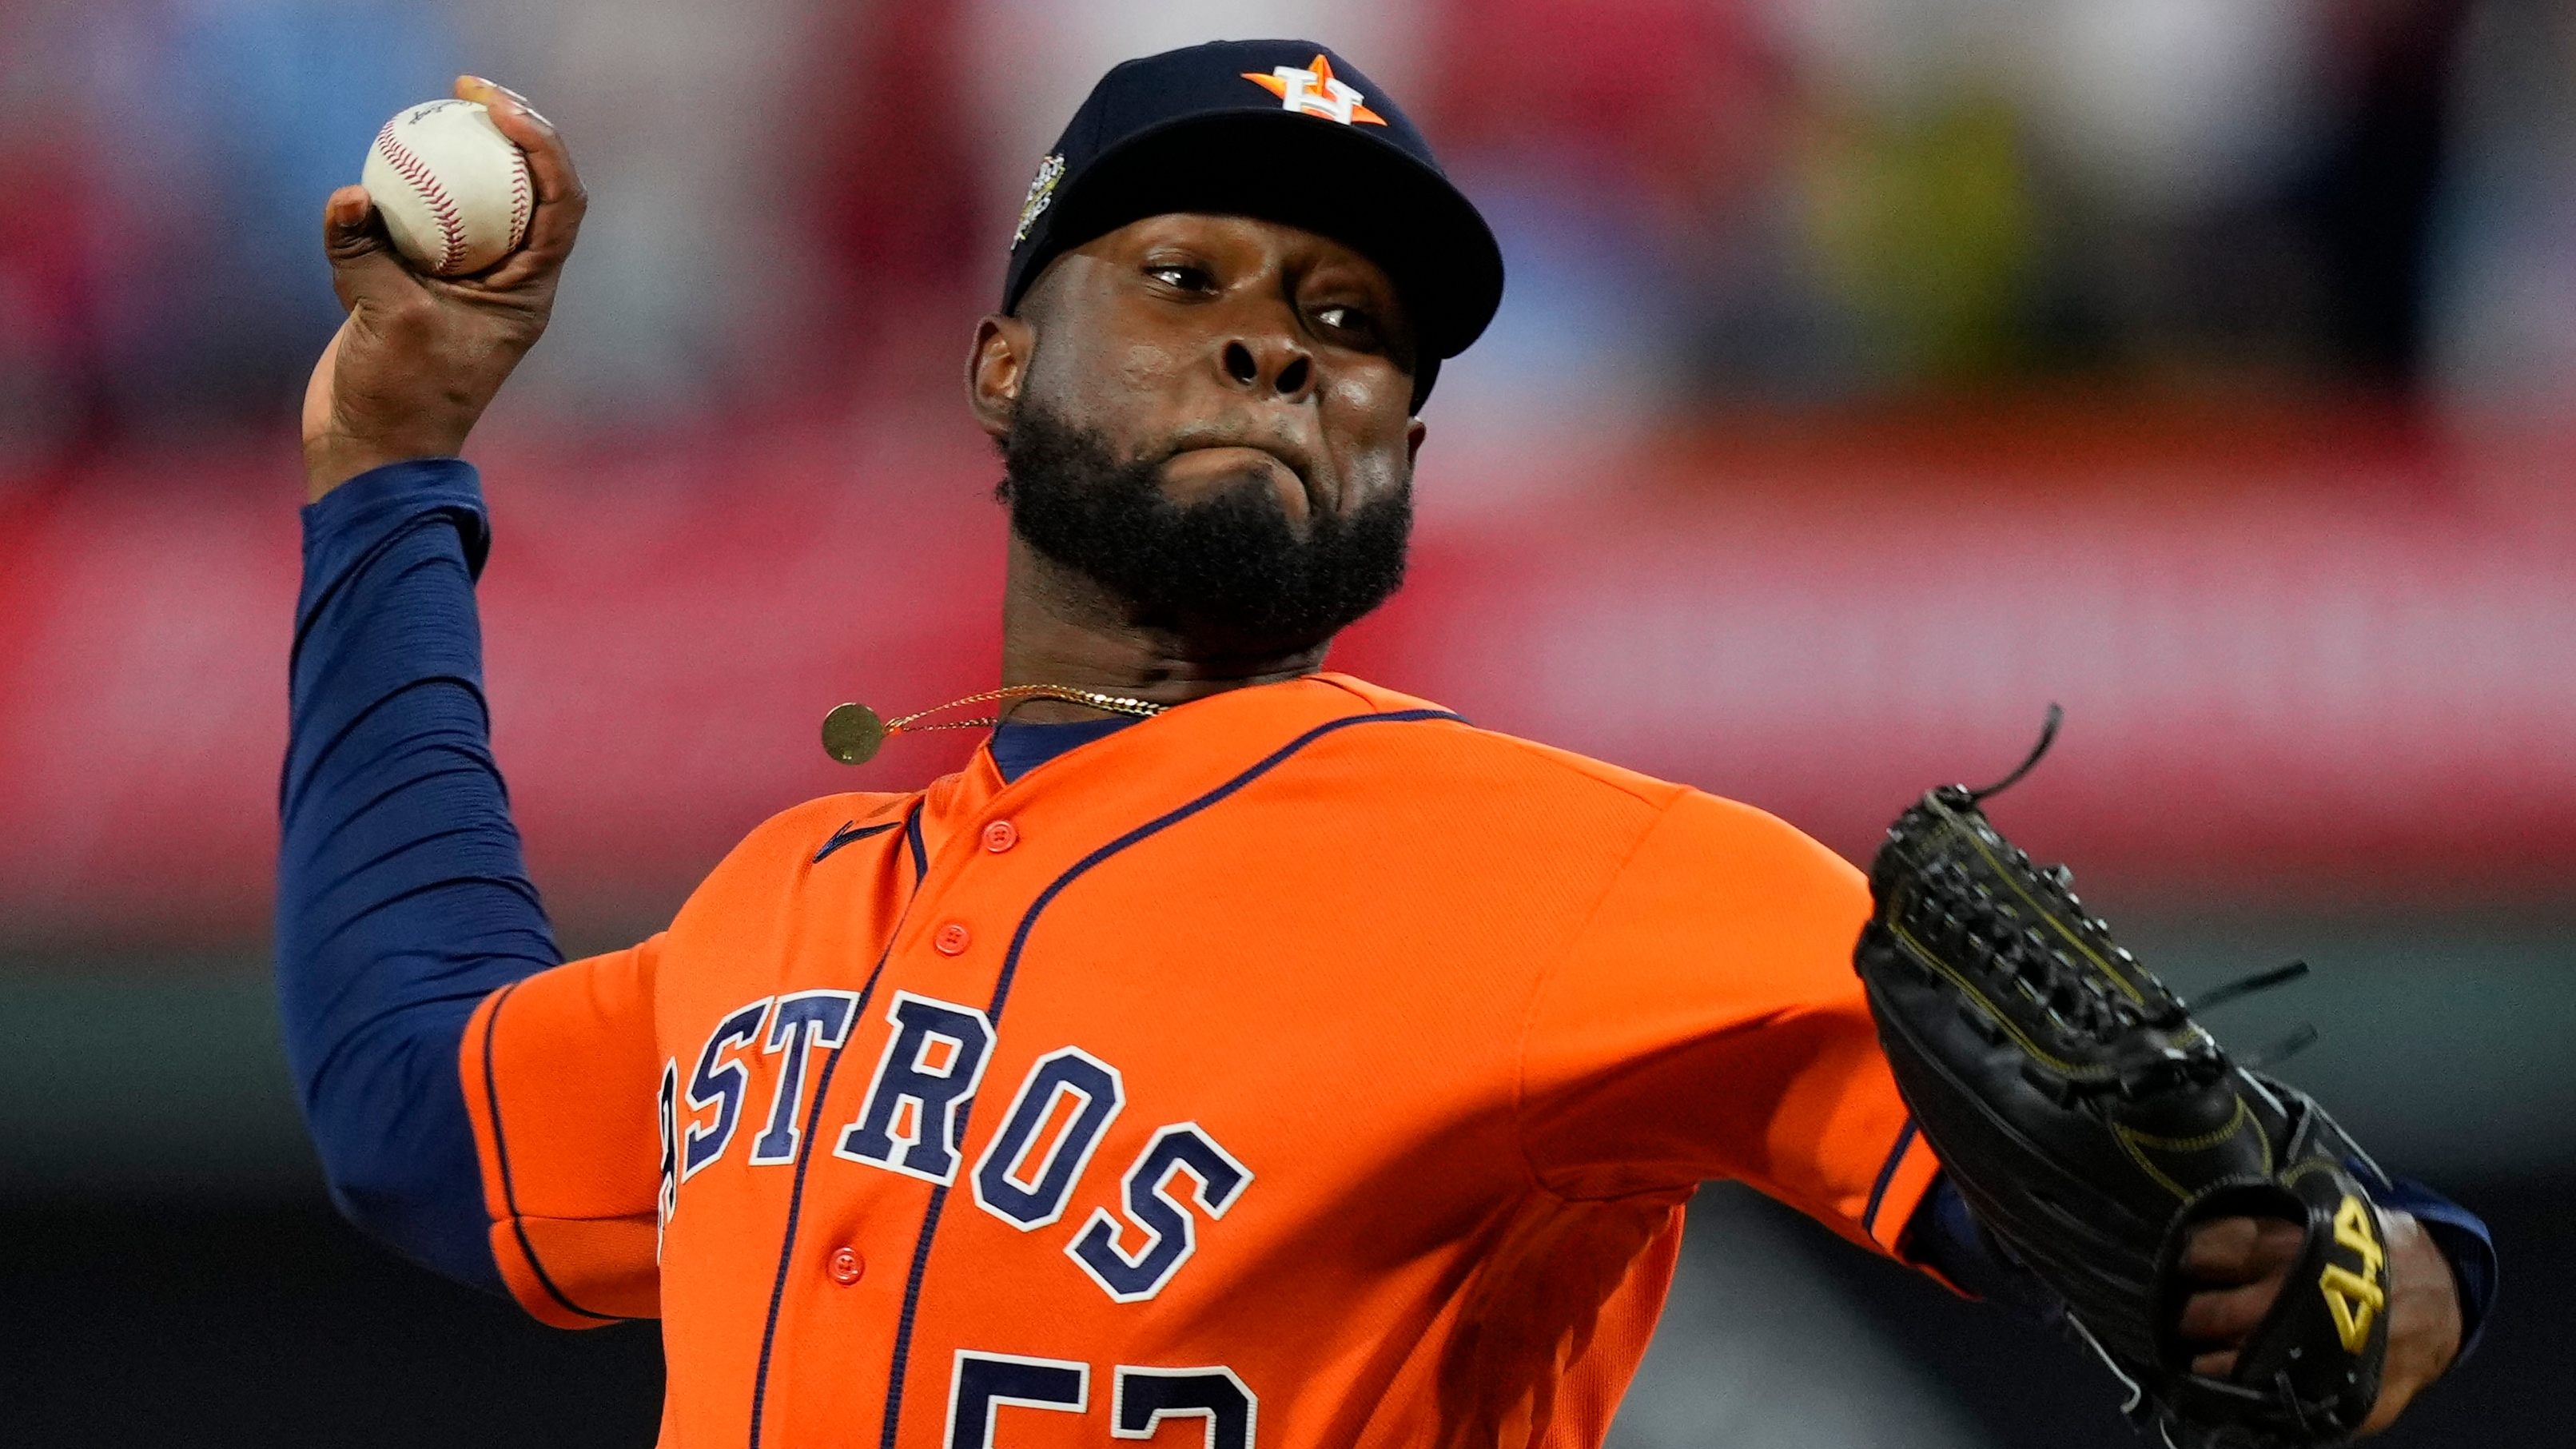 Cristian Javier shines in Astros' Game 3 victory over Rangers